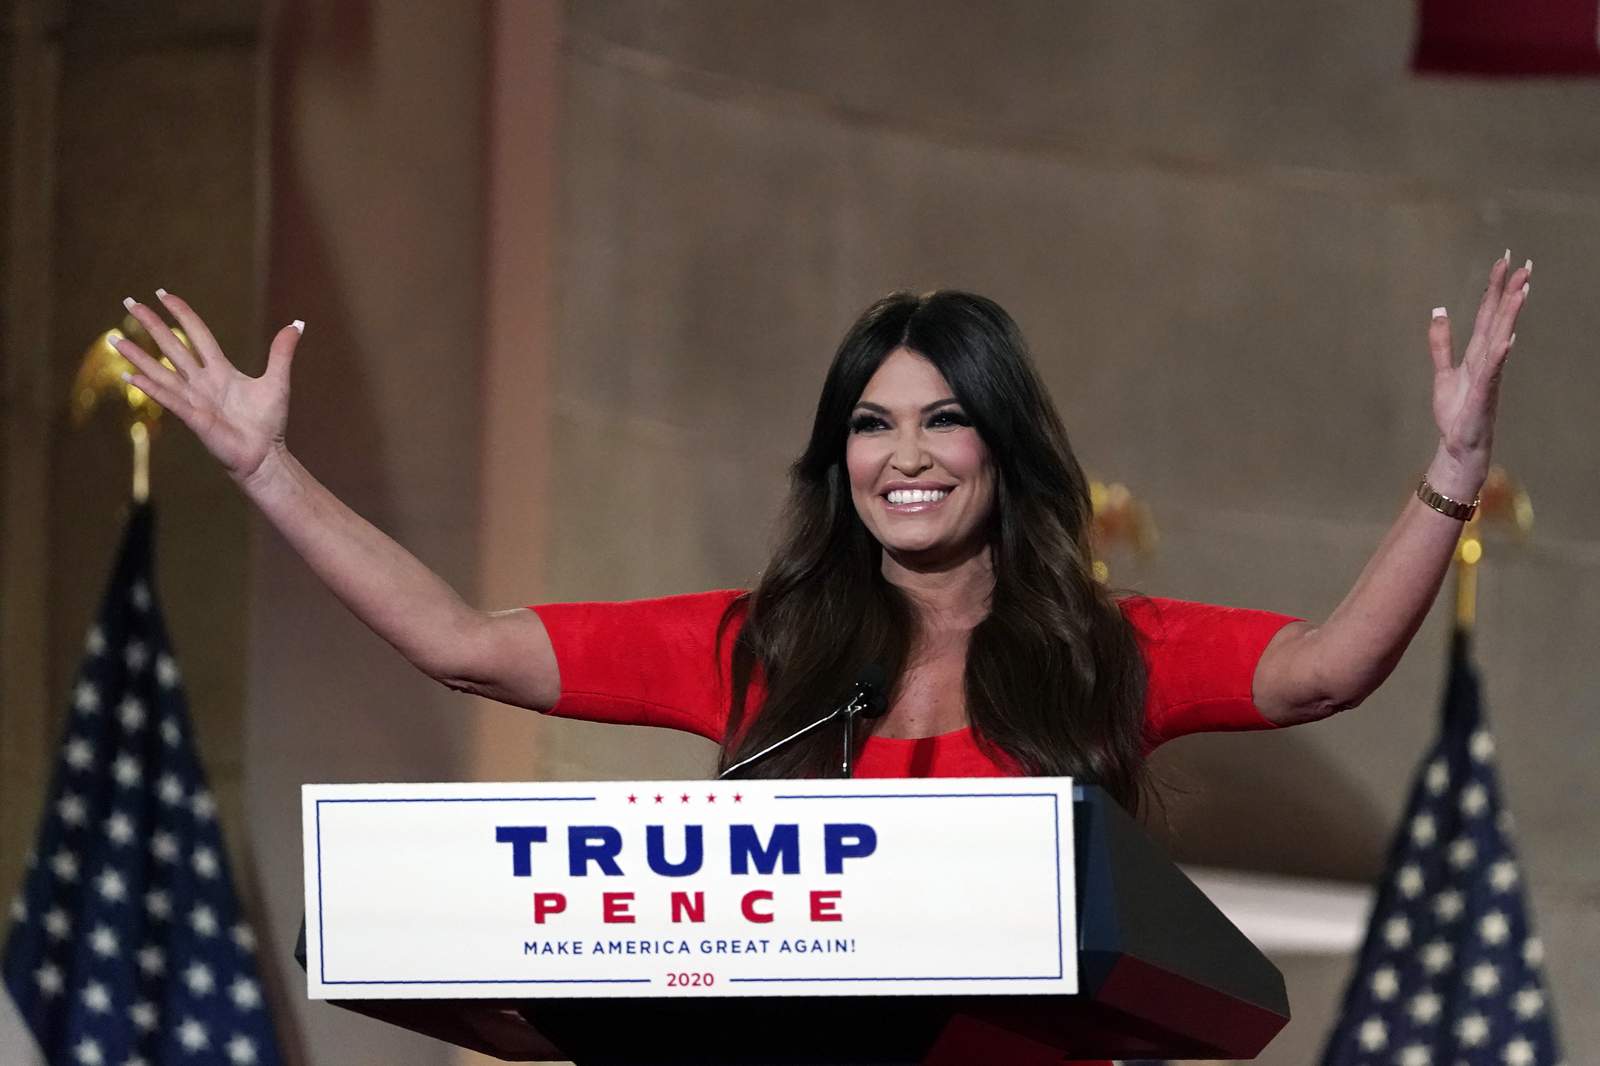 Kimberly Guilfoyle says shes a 1st generation American during RNC speech